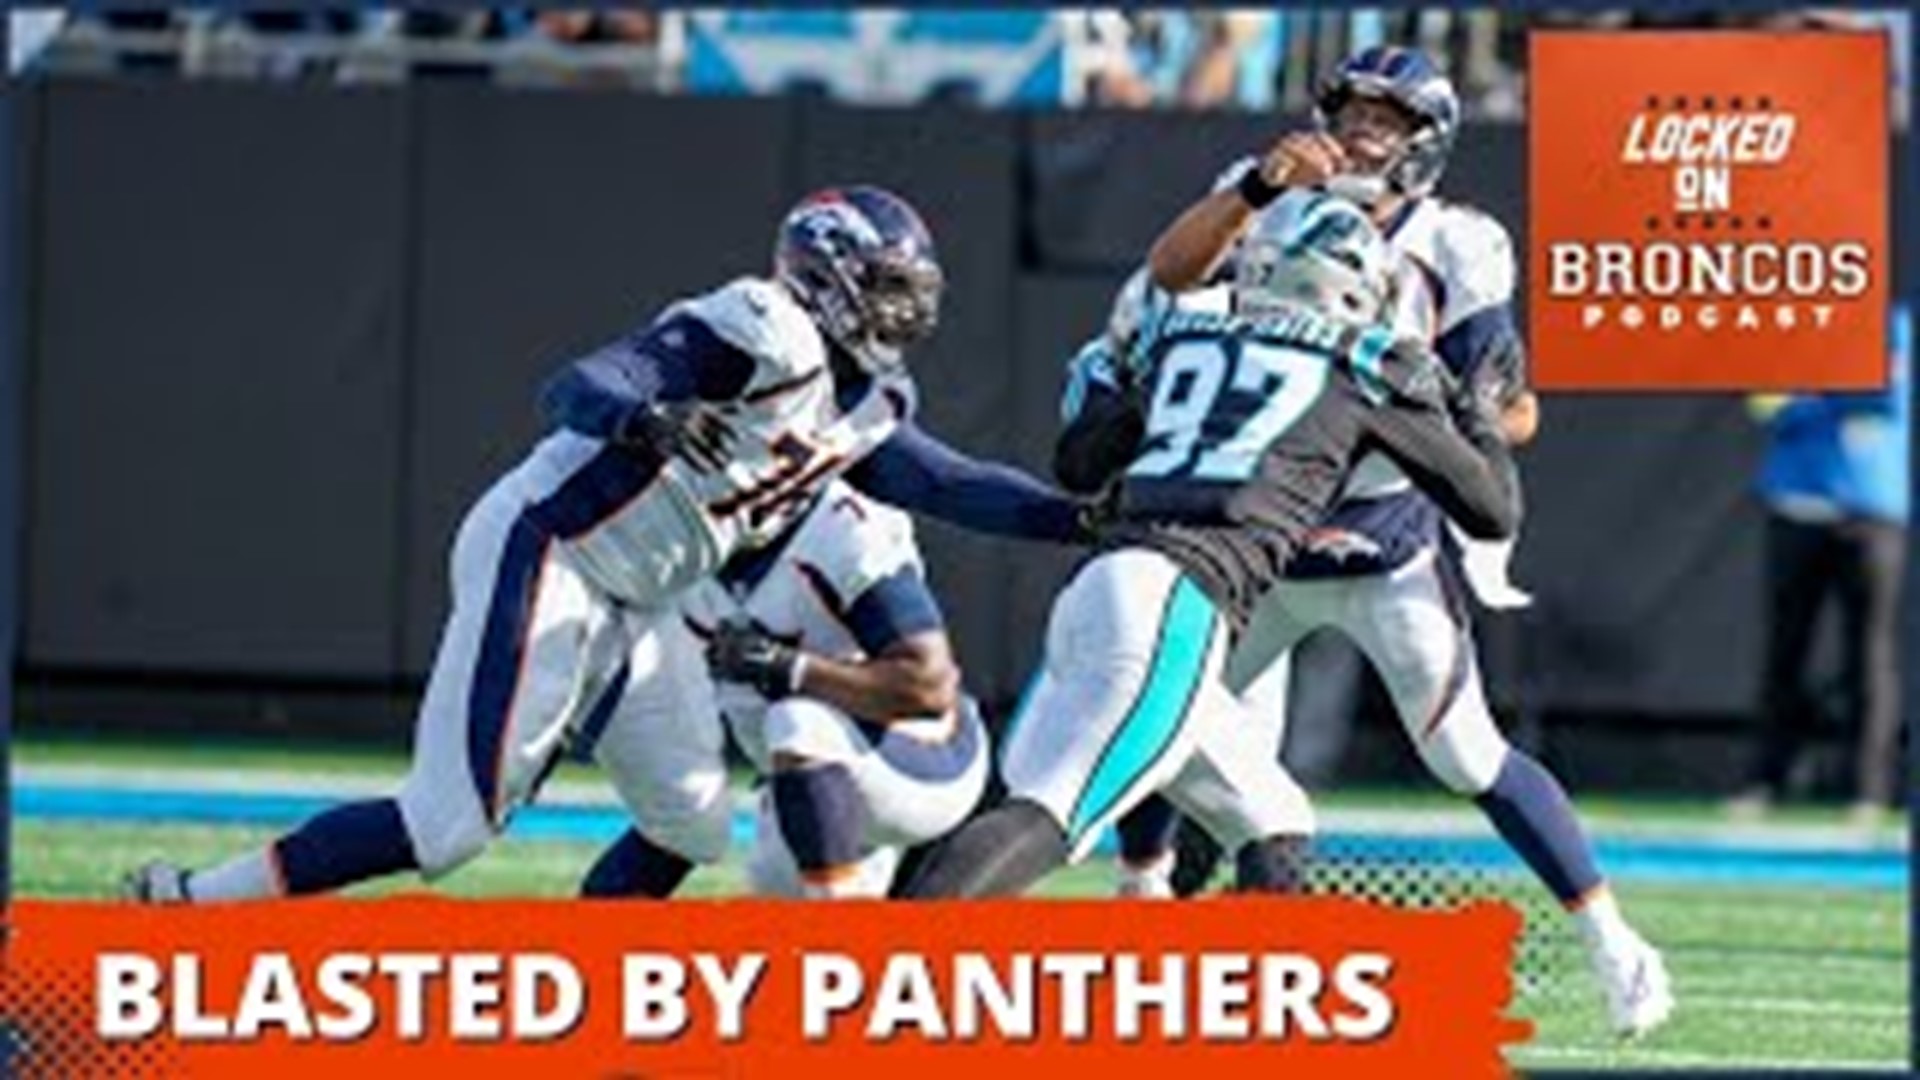 The Denver Broncos were blasted by the Carolina Panthers in a disappointing road loss on Sunday, dropping them to 3-8 on the season.